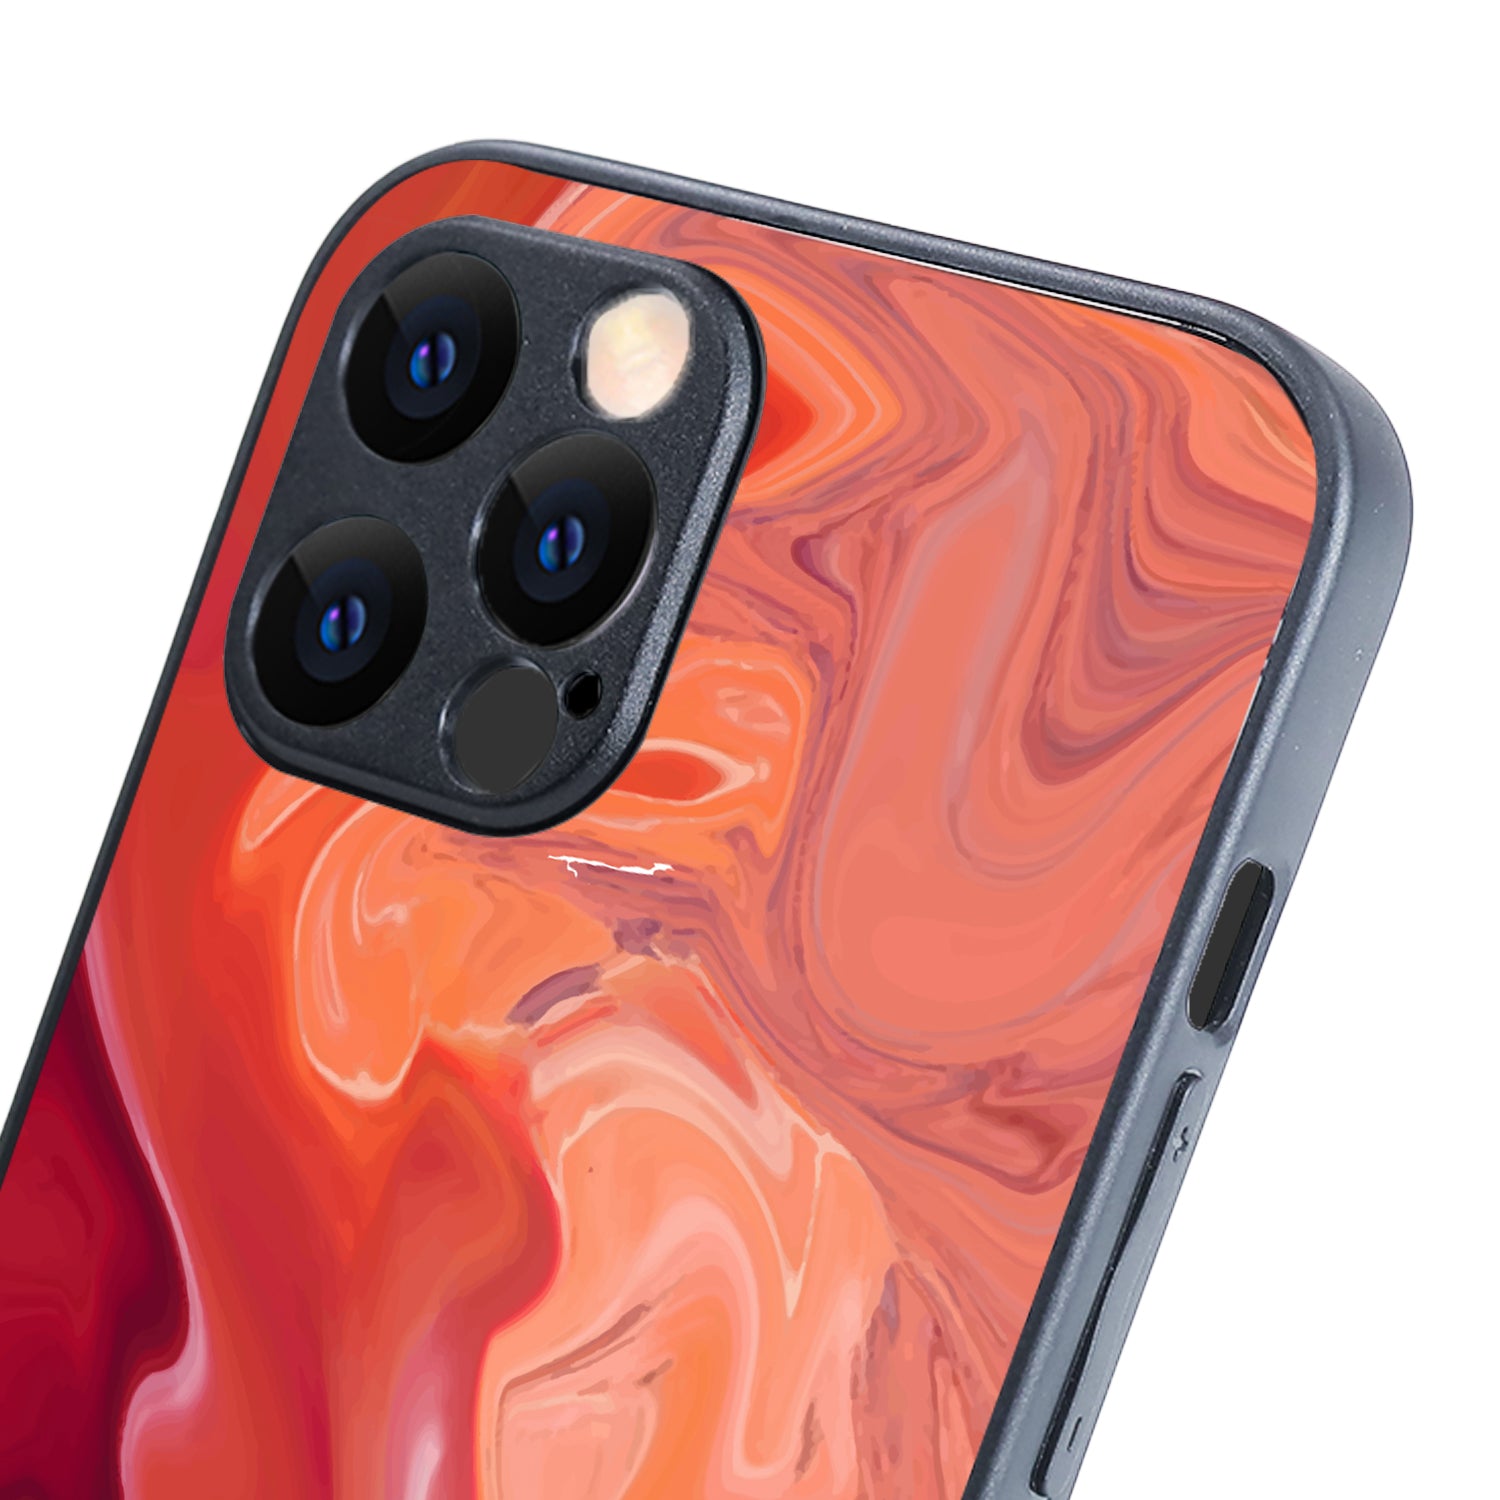 Red Marble iPhone 12 Pro Max Case